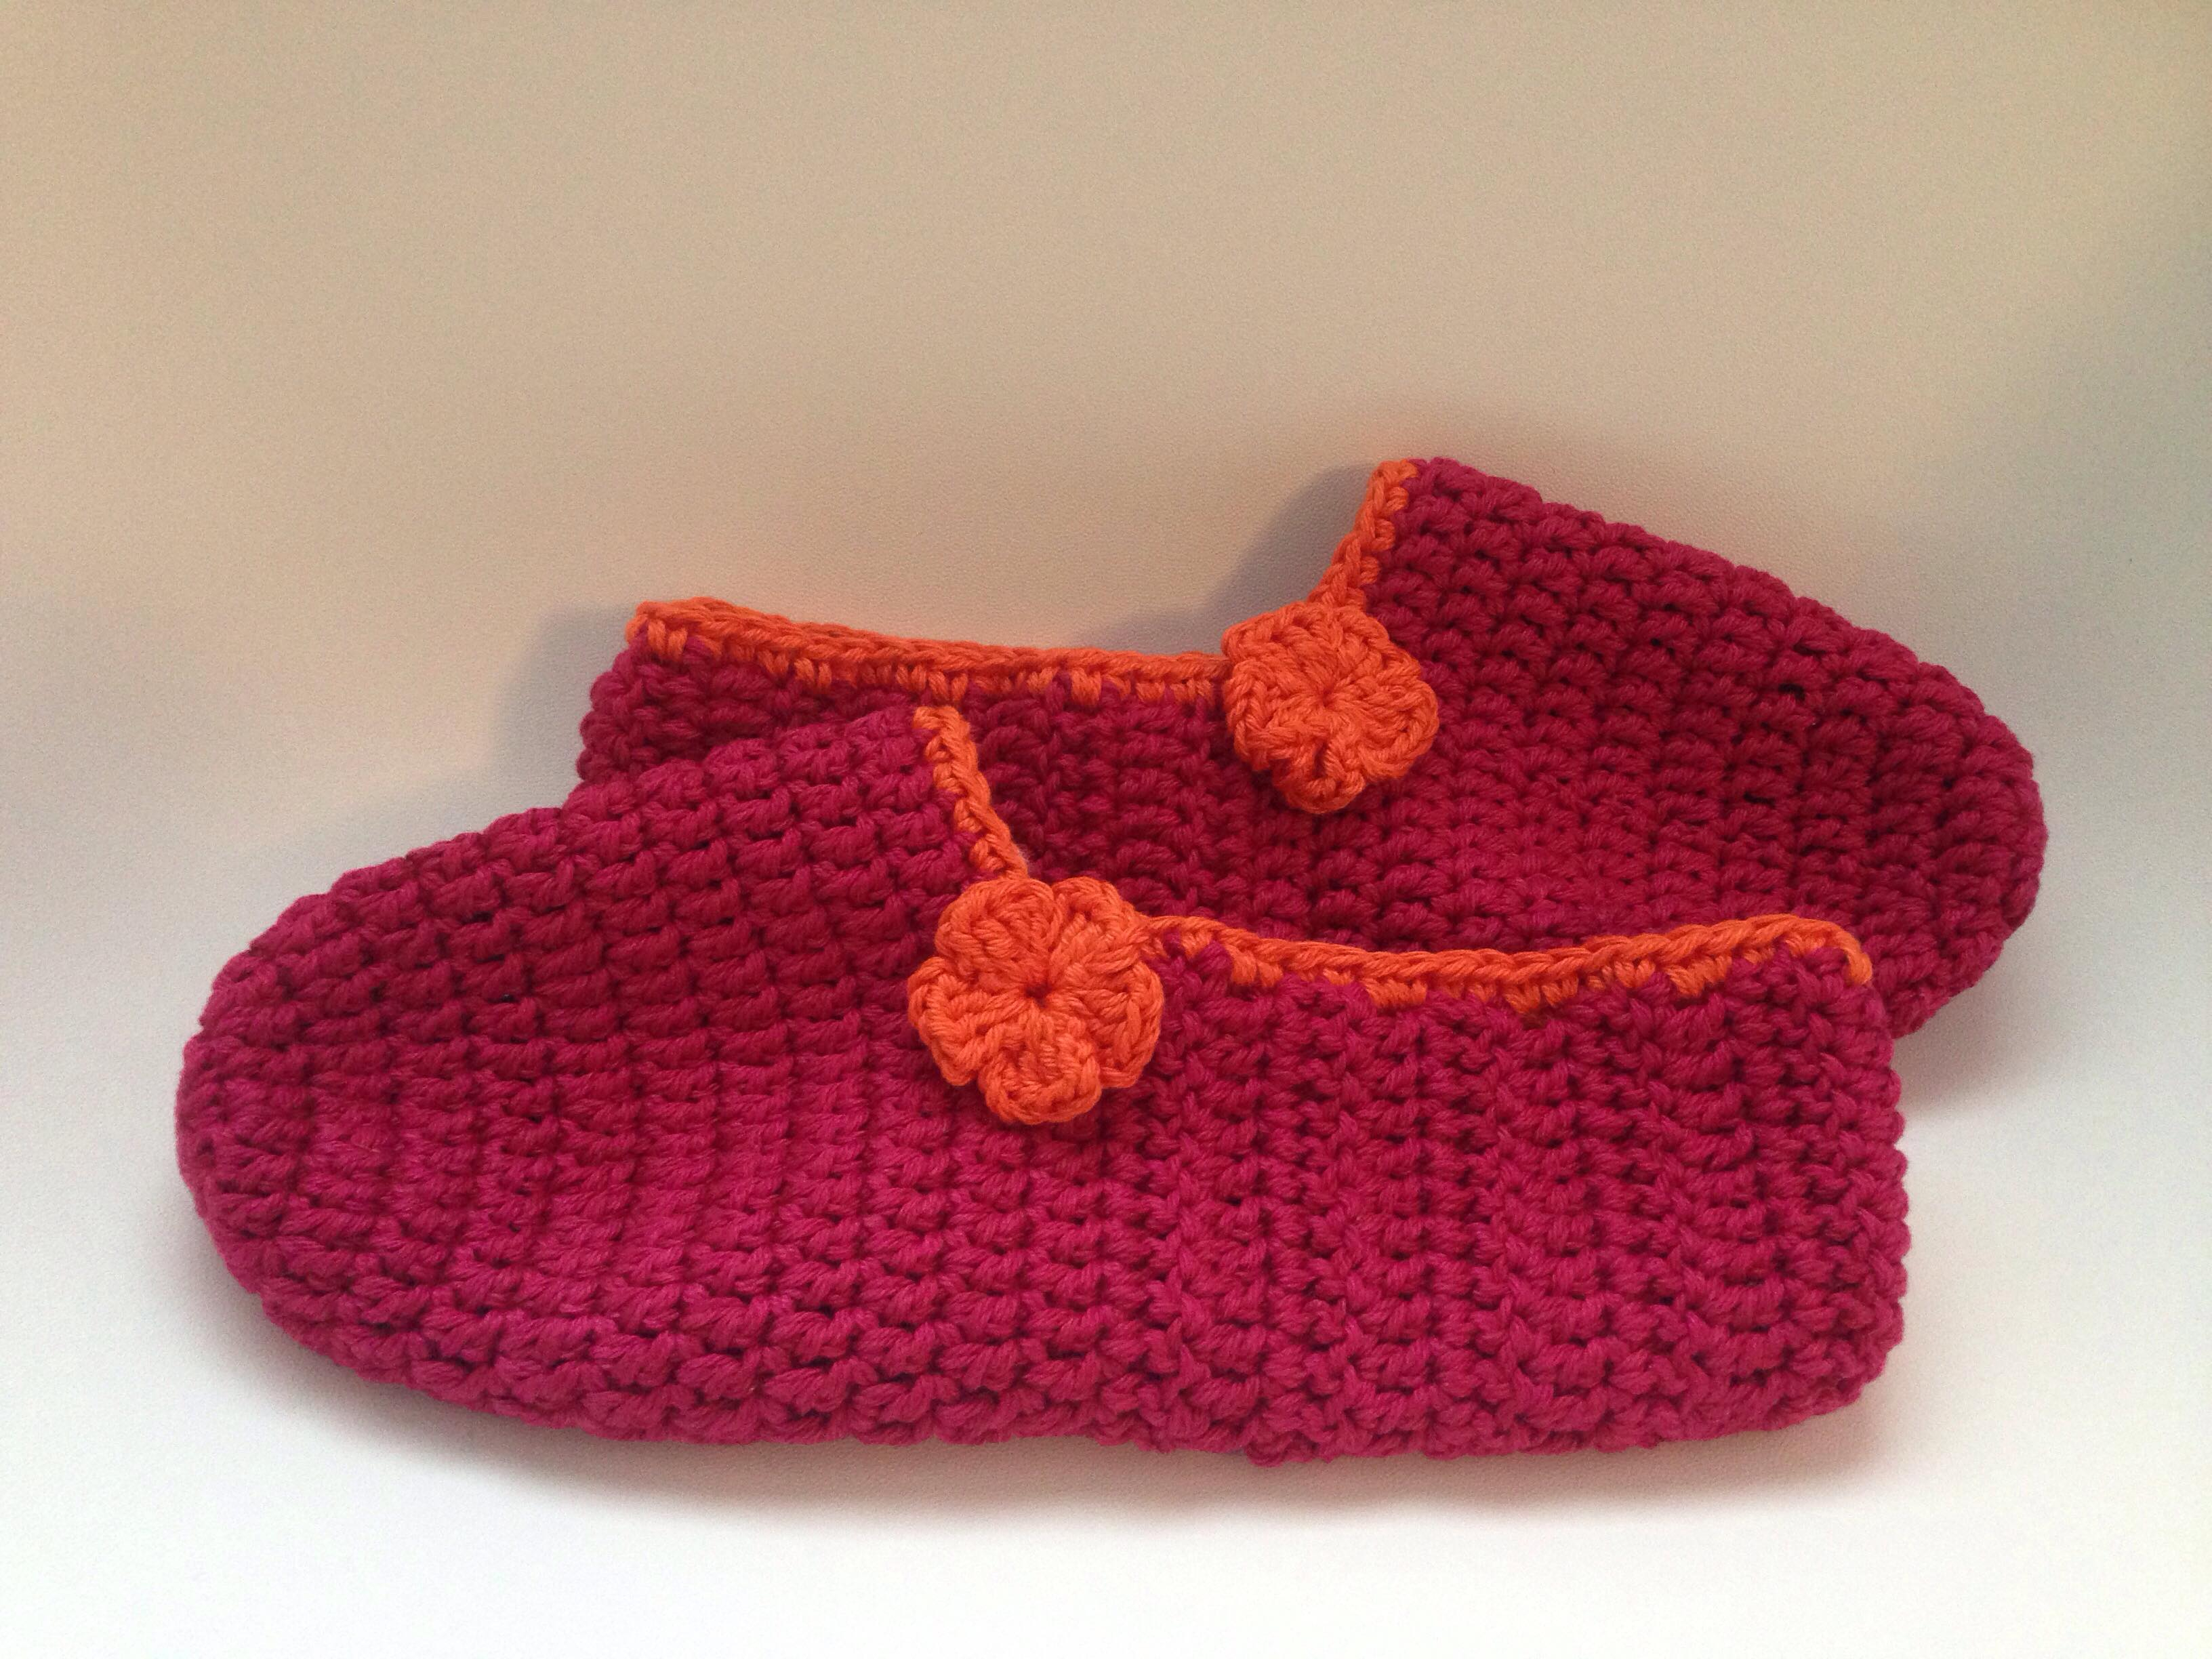 Crochet Slippers Pattern Easy Beginner Crochet Slippers Itchin For Some Stitchin